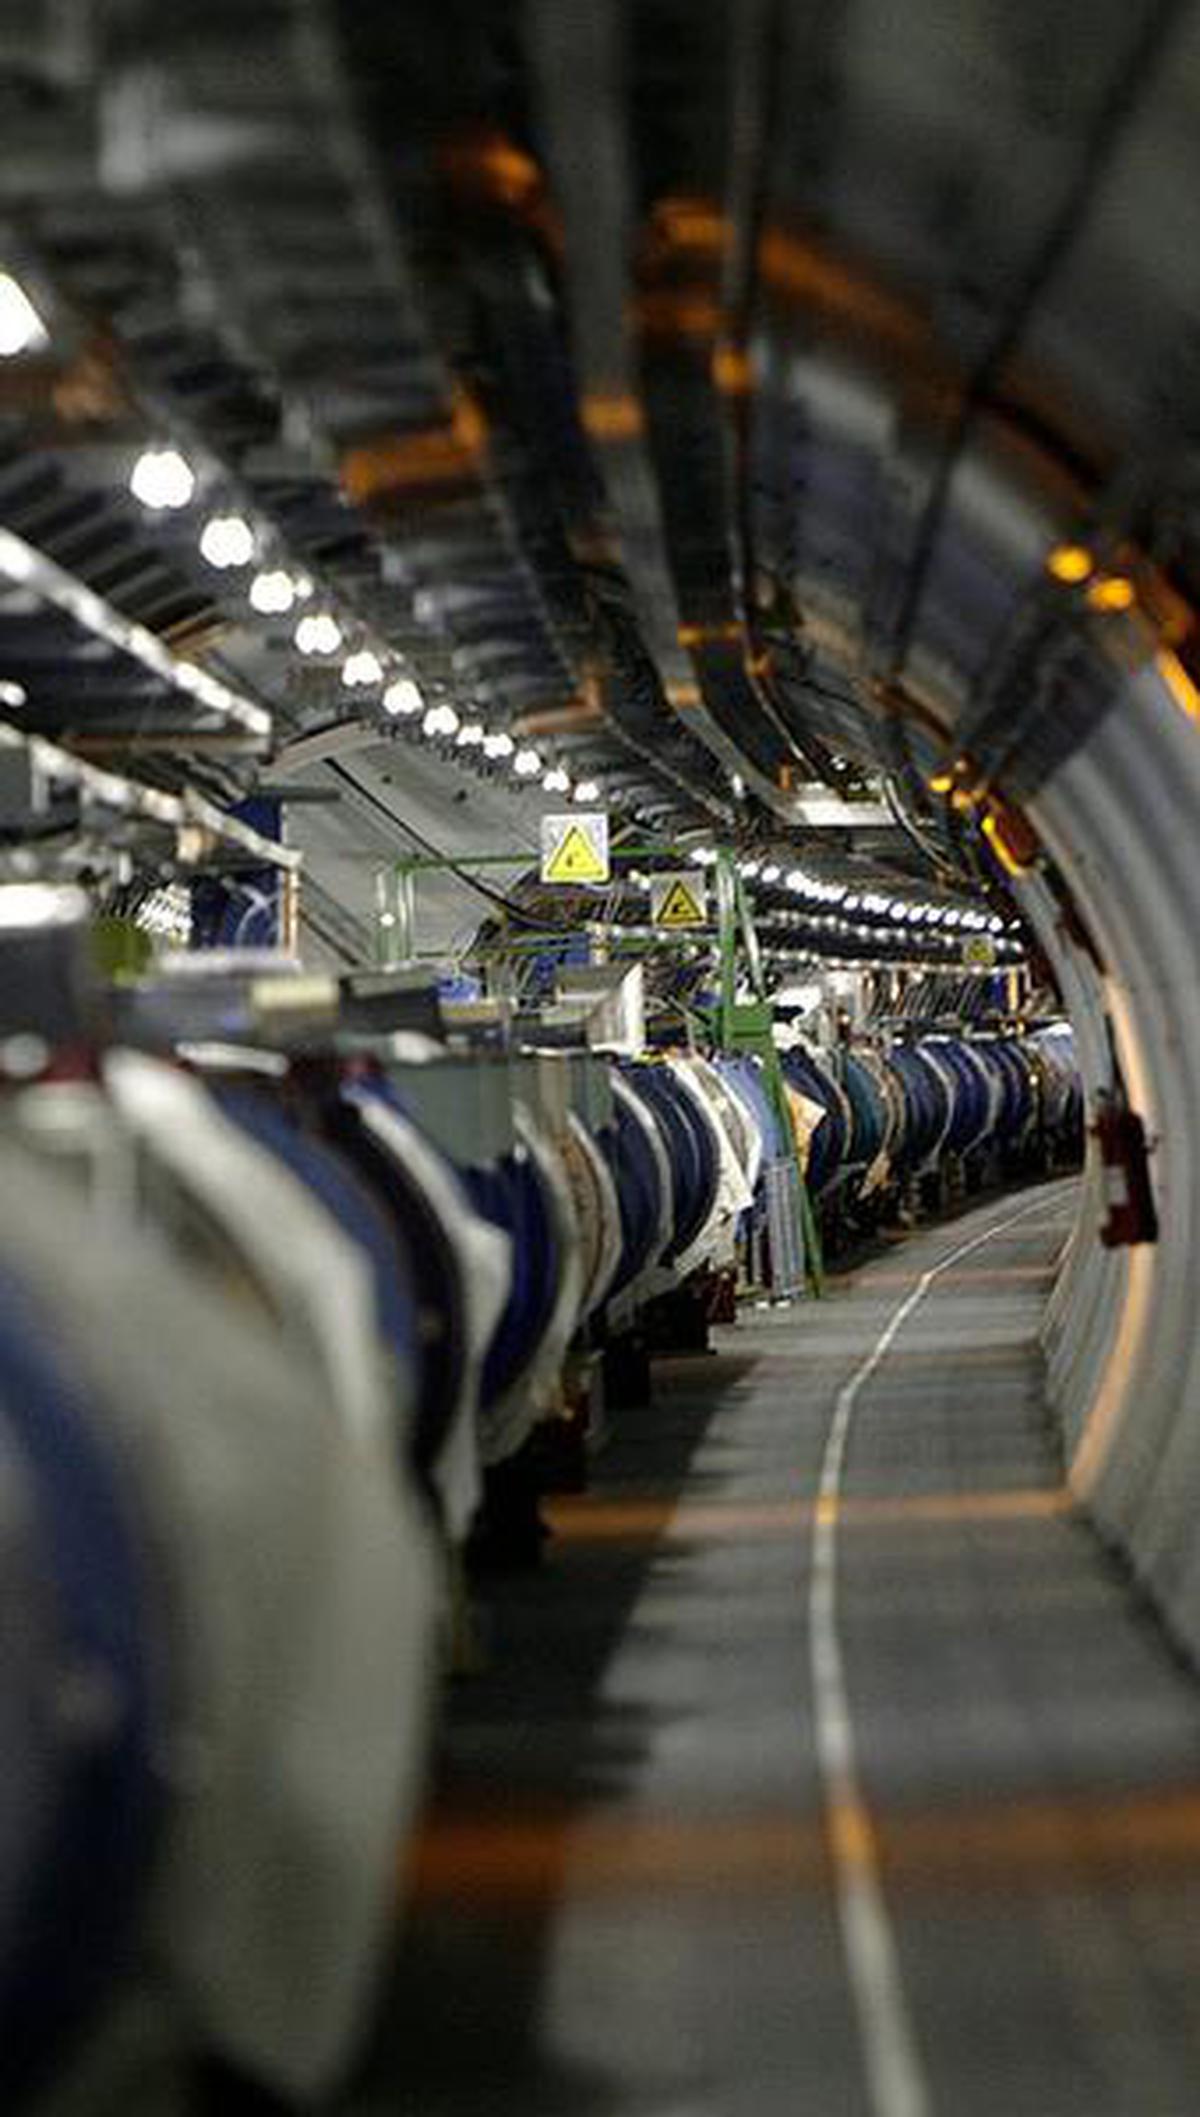 A view of the LHC in its tunnel at CERN, near Geneva, Switzerland.